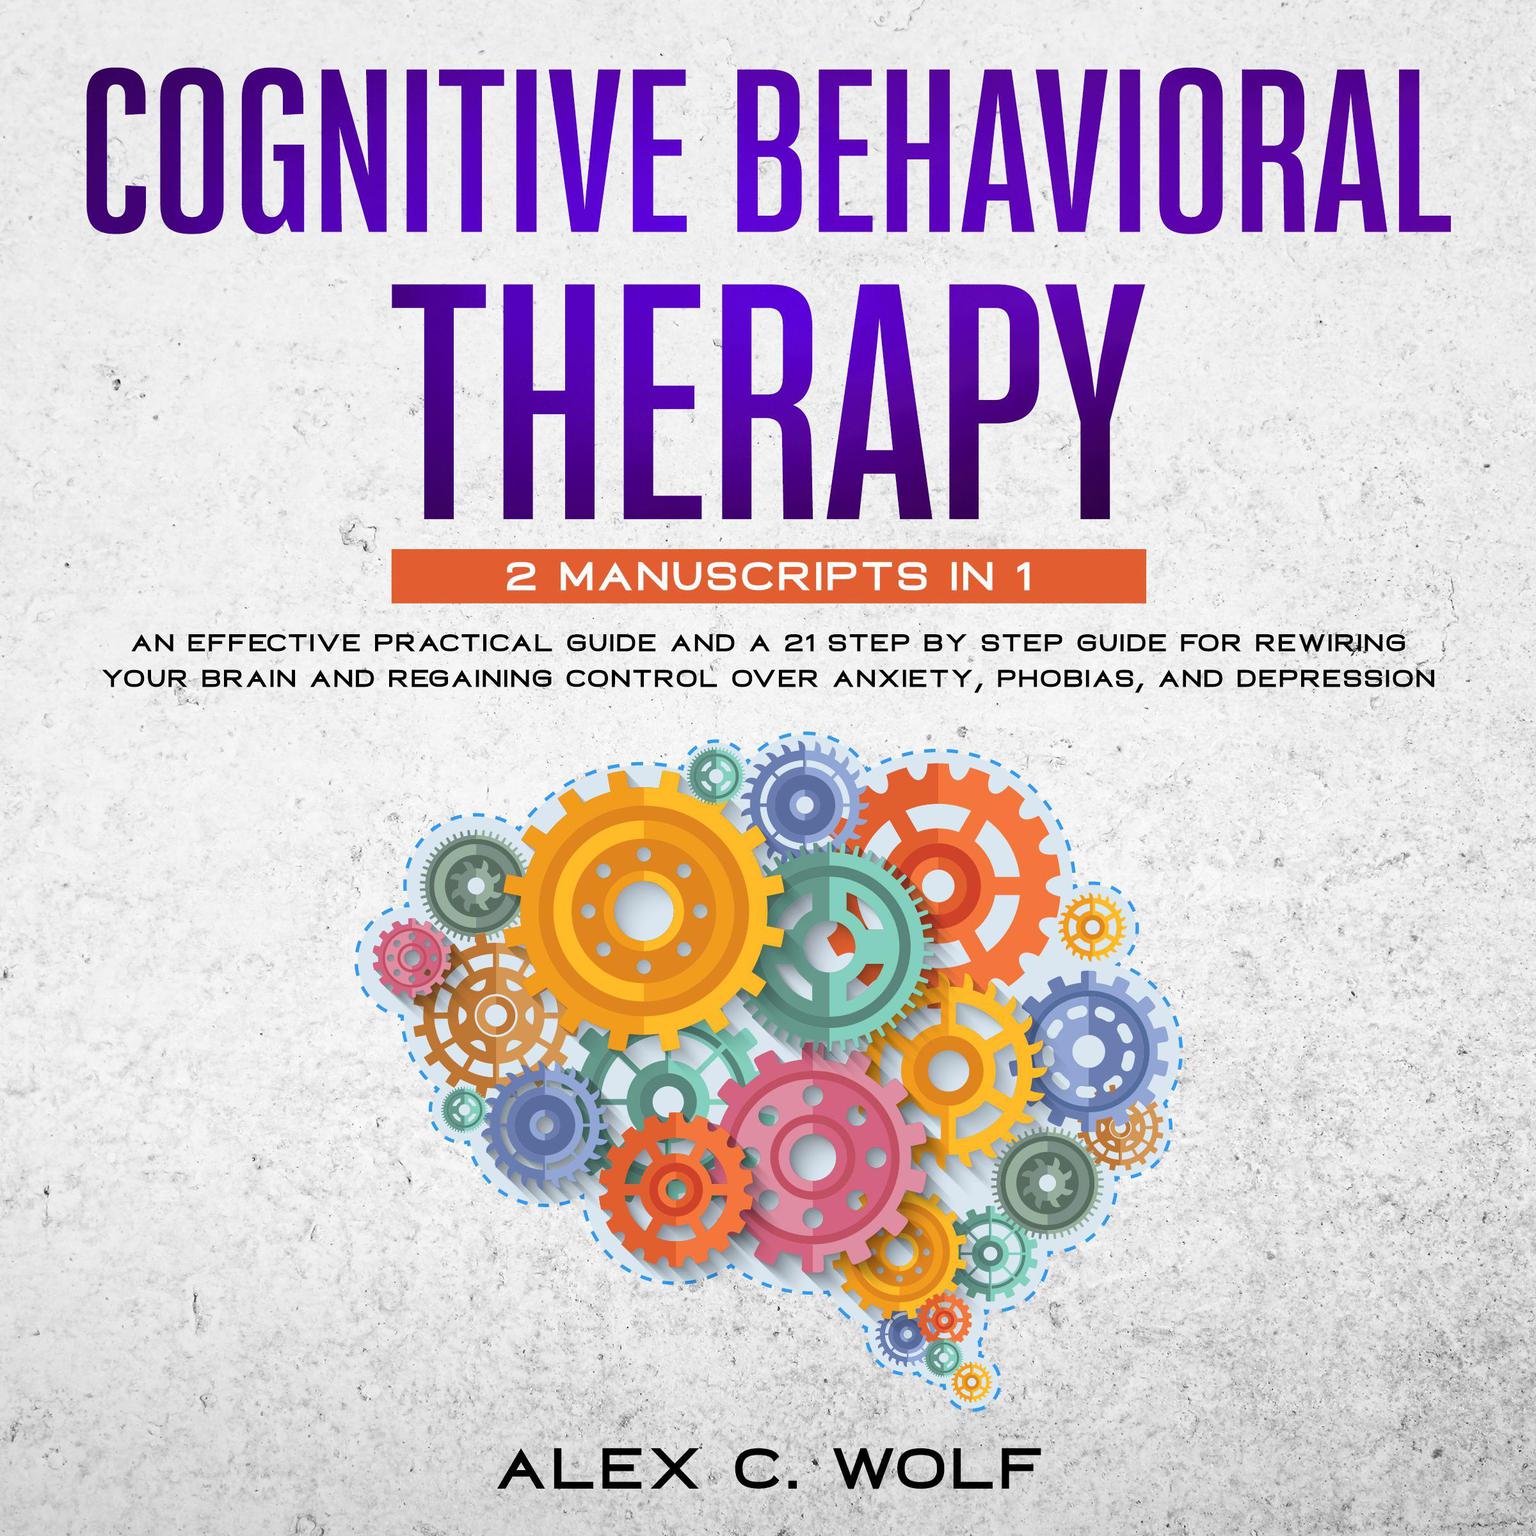 Cognitive Behavioral Therapy: 2 manuscripts in 1 - An Effective Practical Guide and A 21 Step by Step Guide for Rewiring Your Brain and Regaining Control Over Anxiety, Phobias, and Depression Audiobook, by Alex C. Wolf